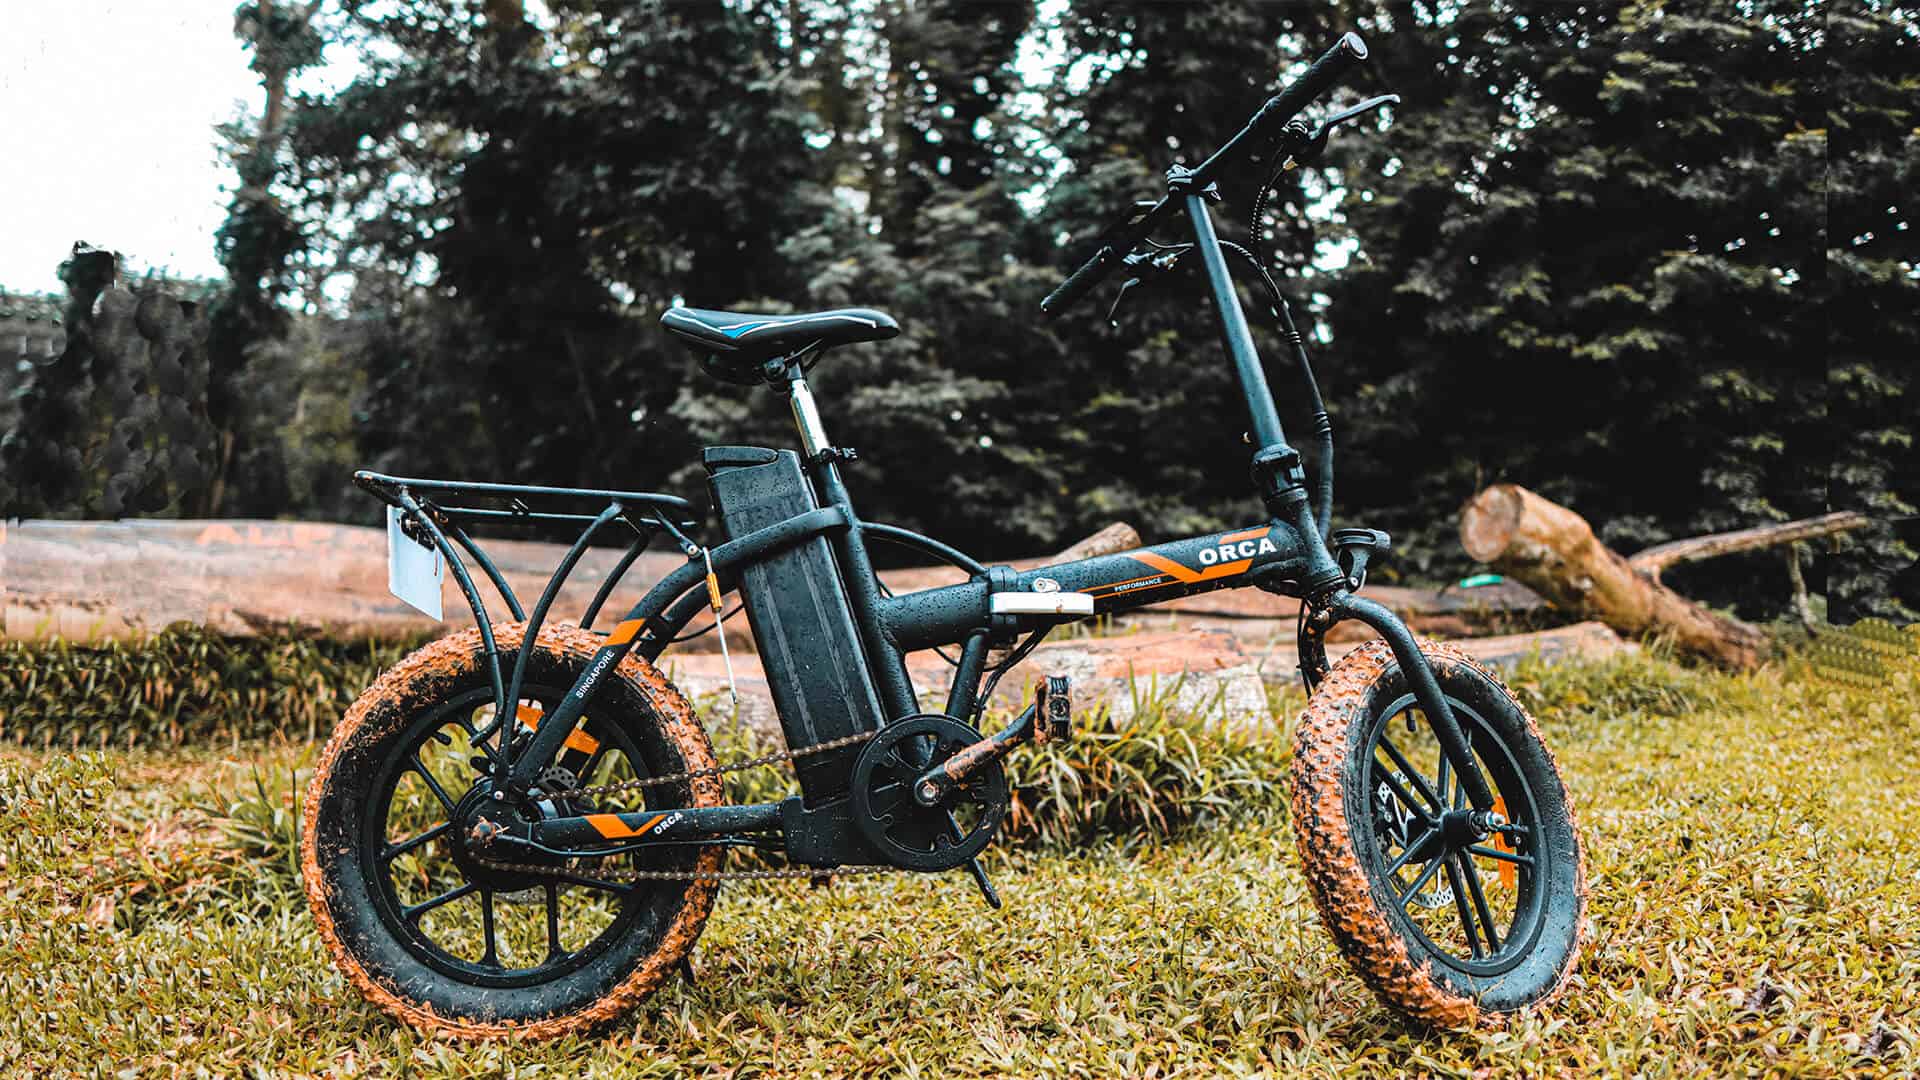 ORCA (BLACK) LTA approved fat tyre ebike at The Valley (1)